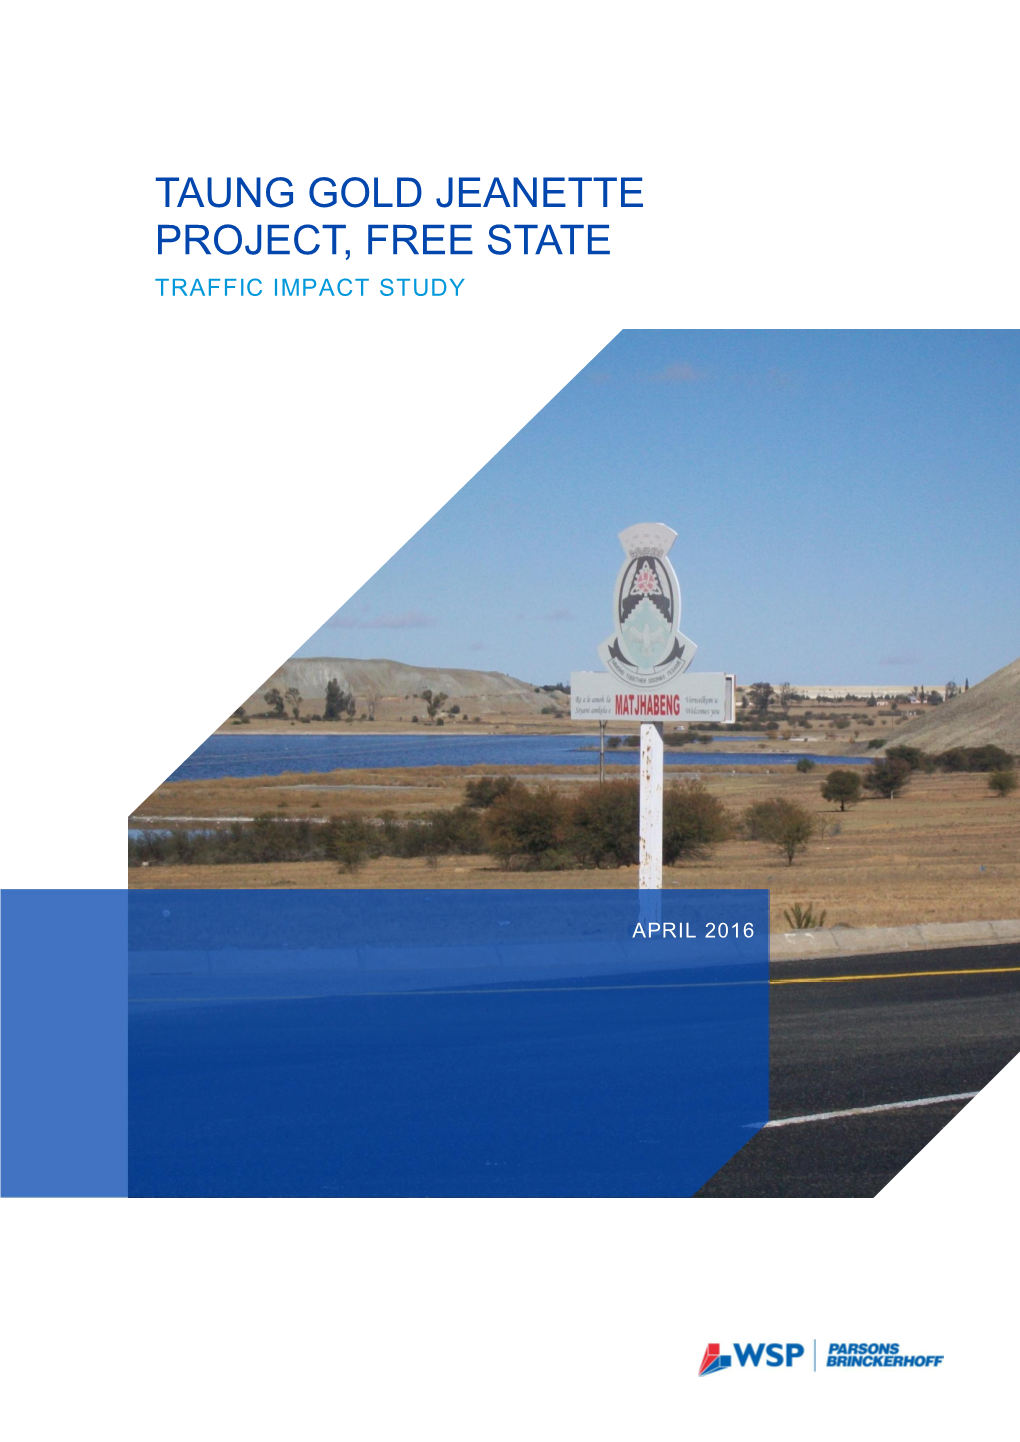 Taung Gold Jeanette Project, Free State Traffic Impact Study